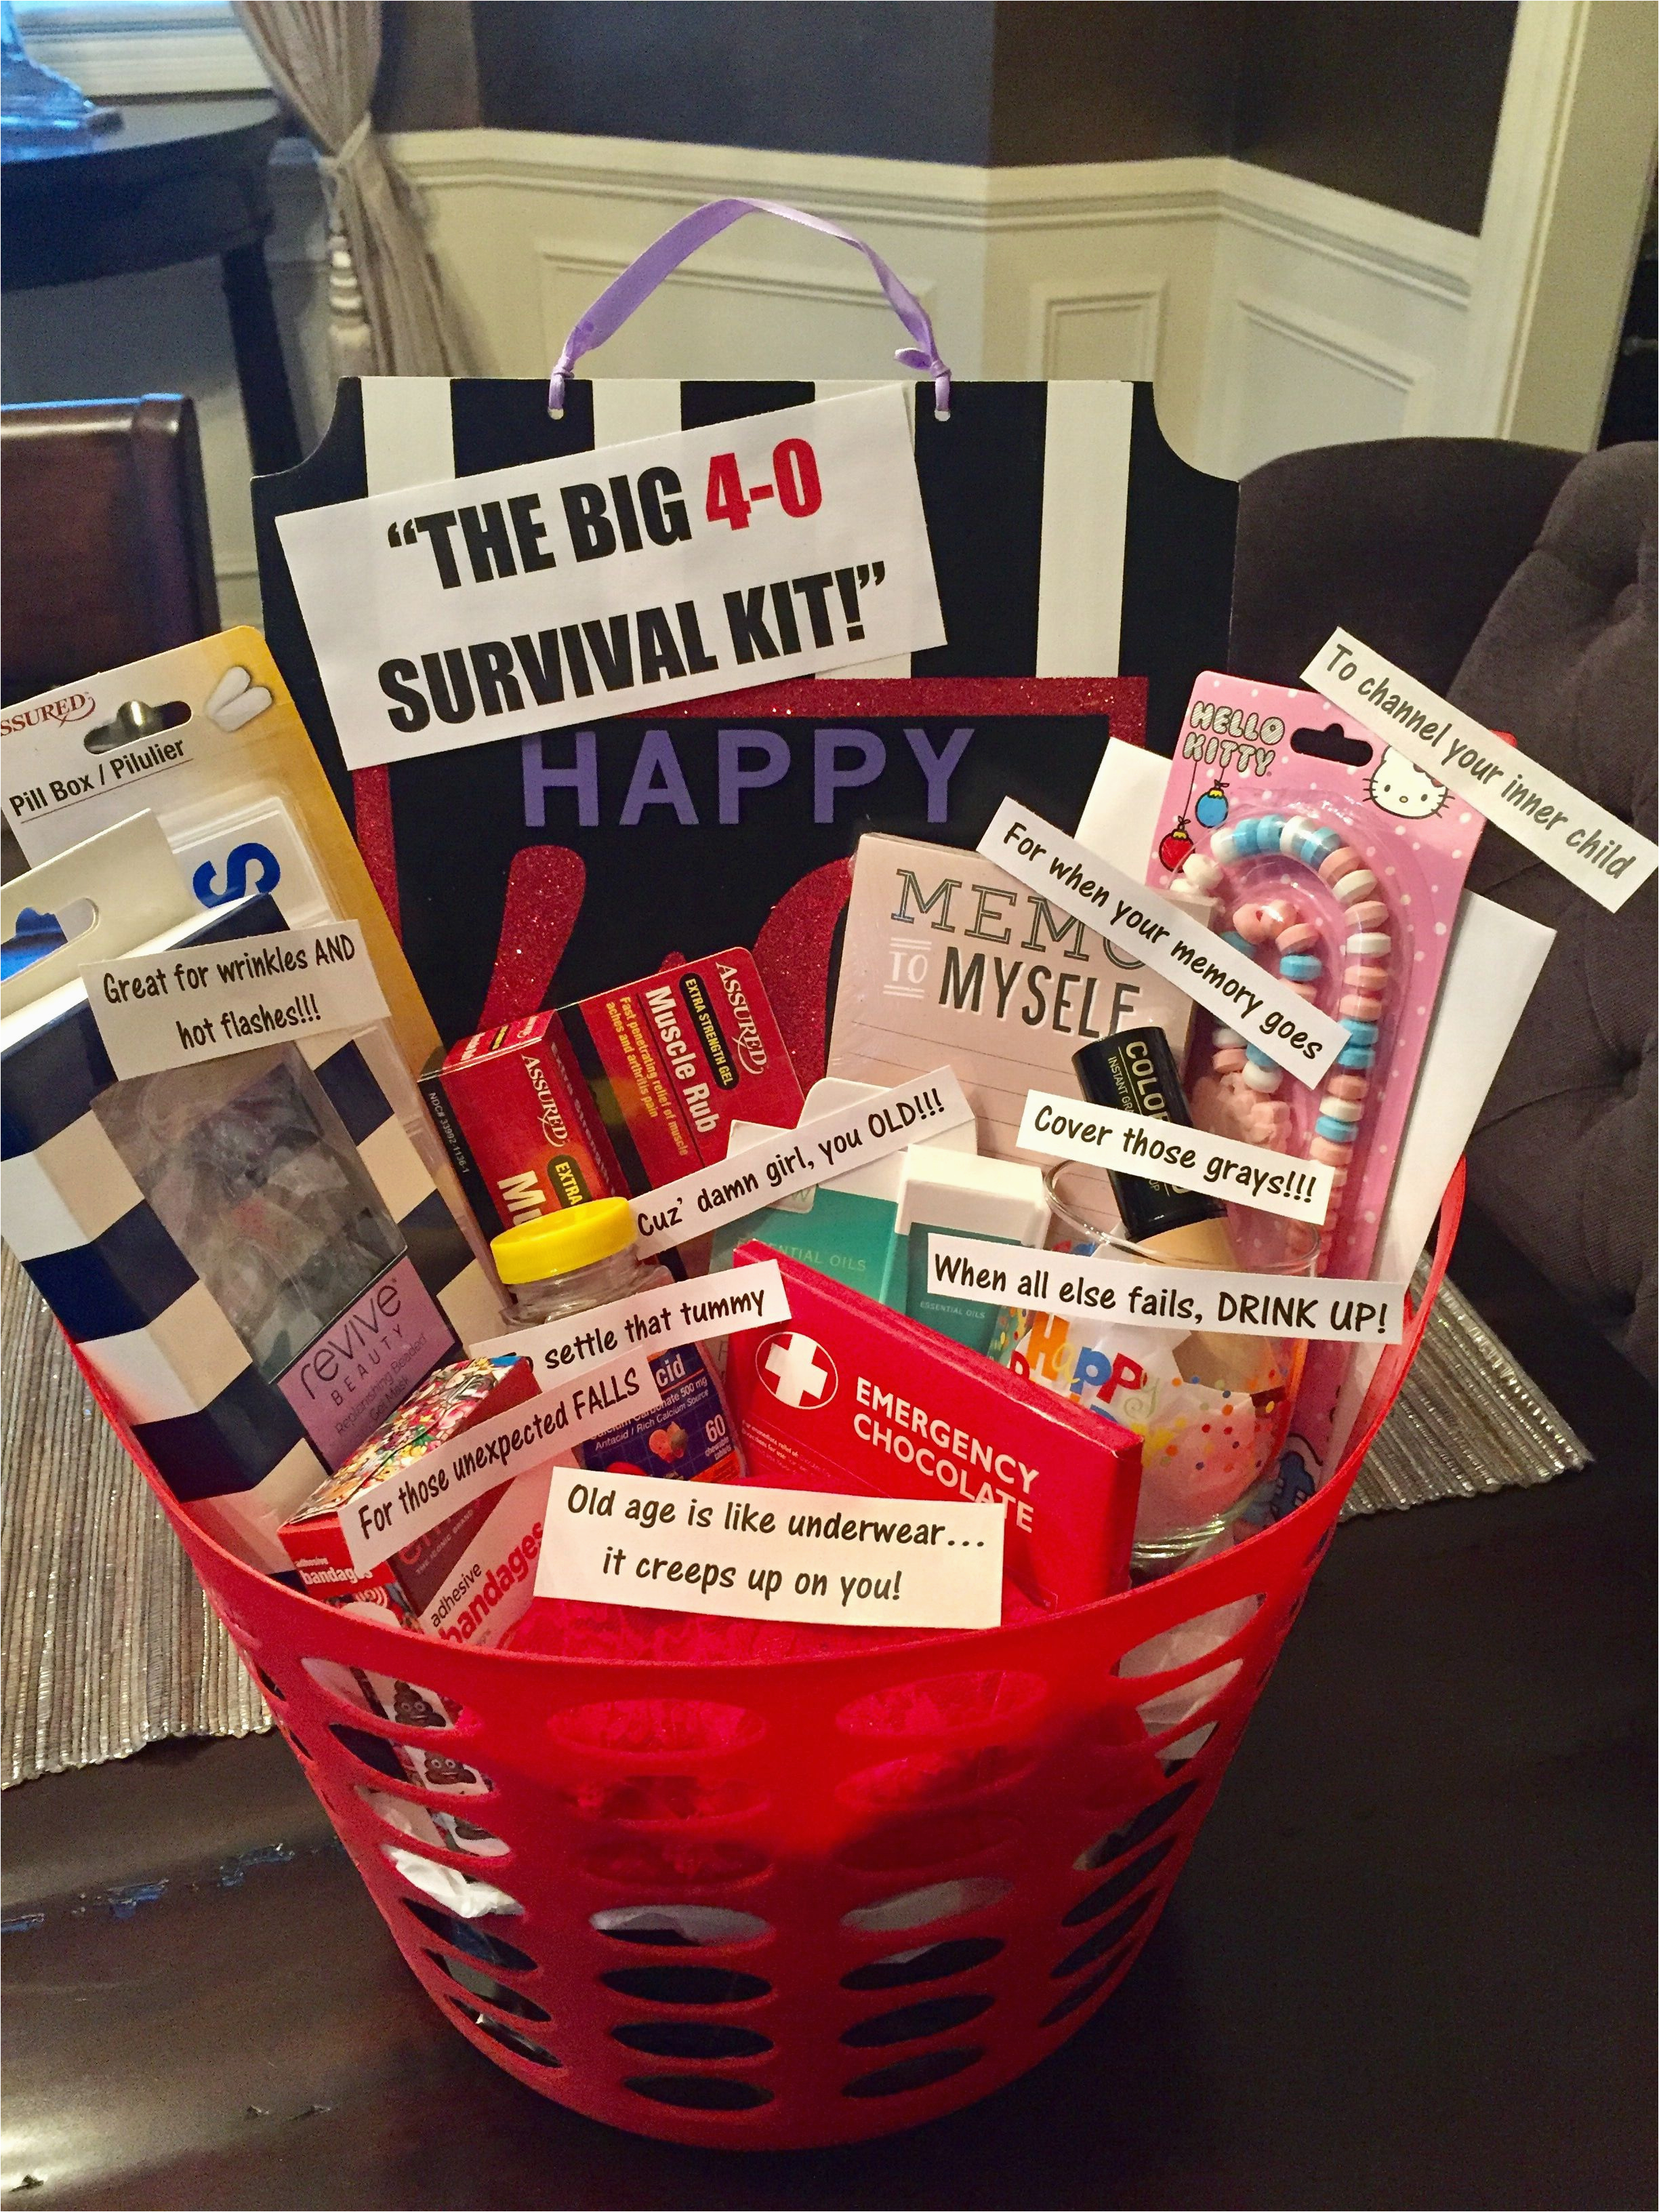 Fortieth Birthday Gift Ideas for Her 40th Birthday Survival Kit for A Woman Most Things From